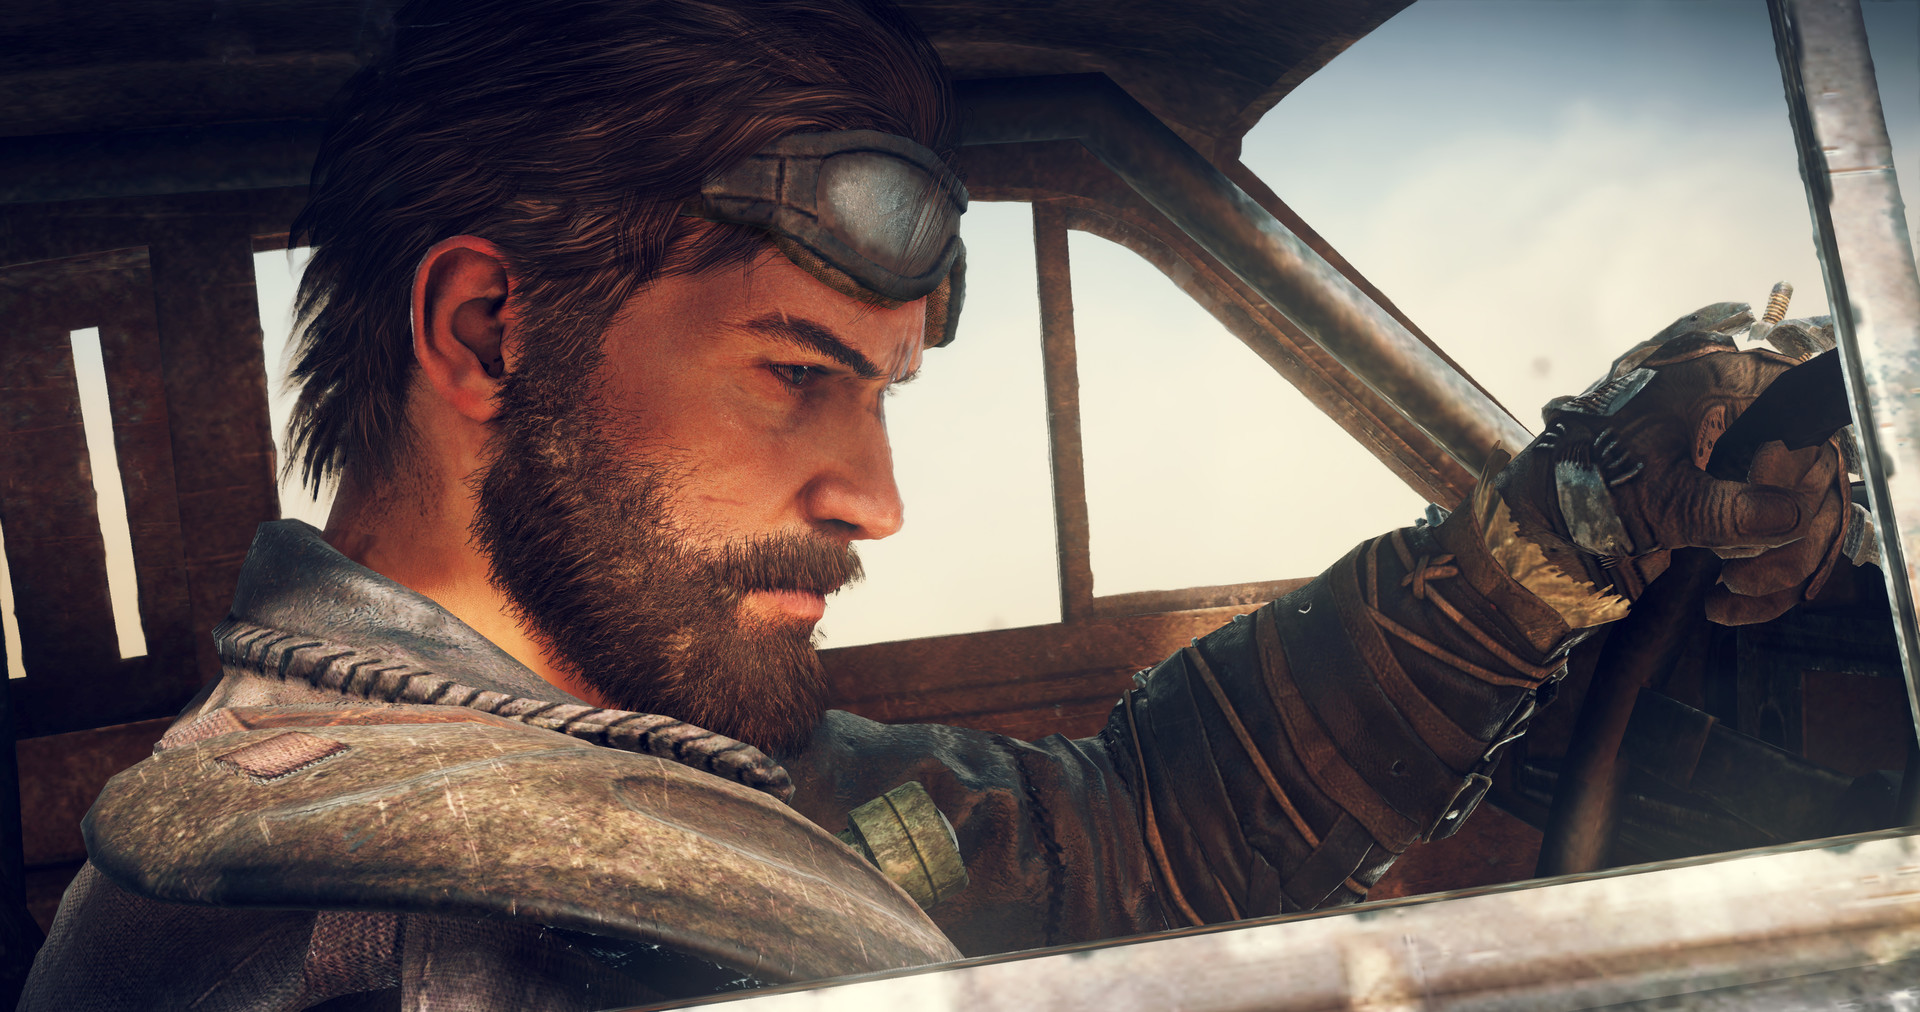 Mad Max 2 may been in development before the pandemic | Gamer